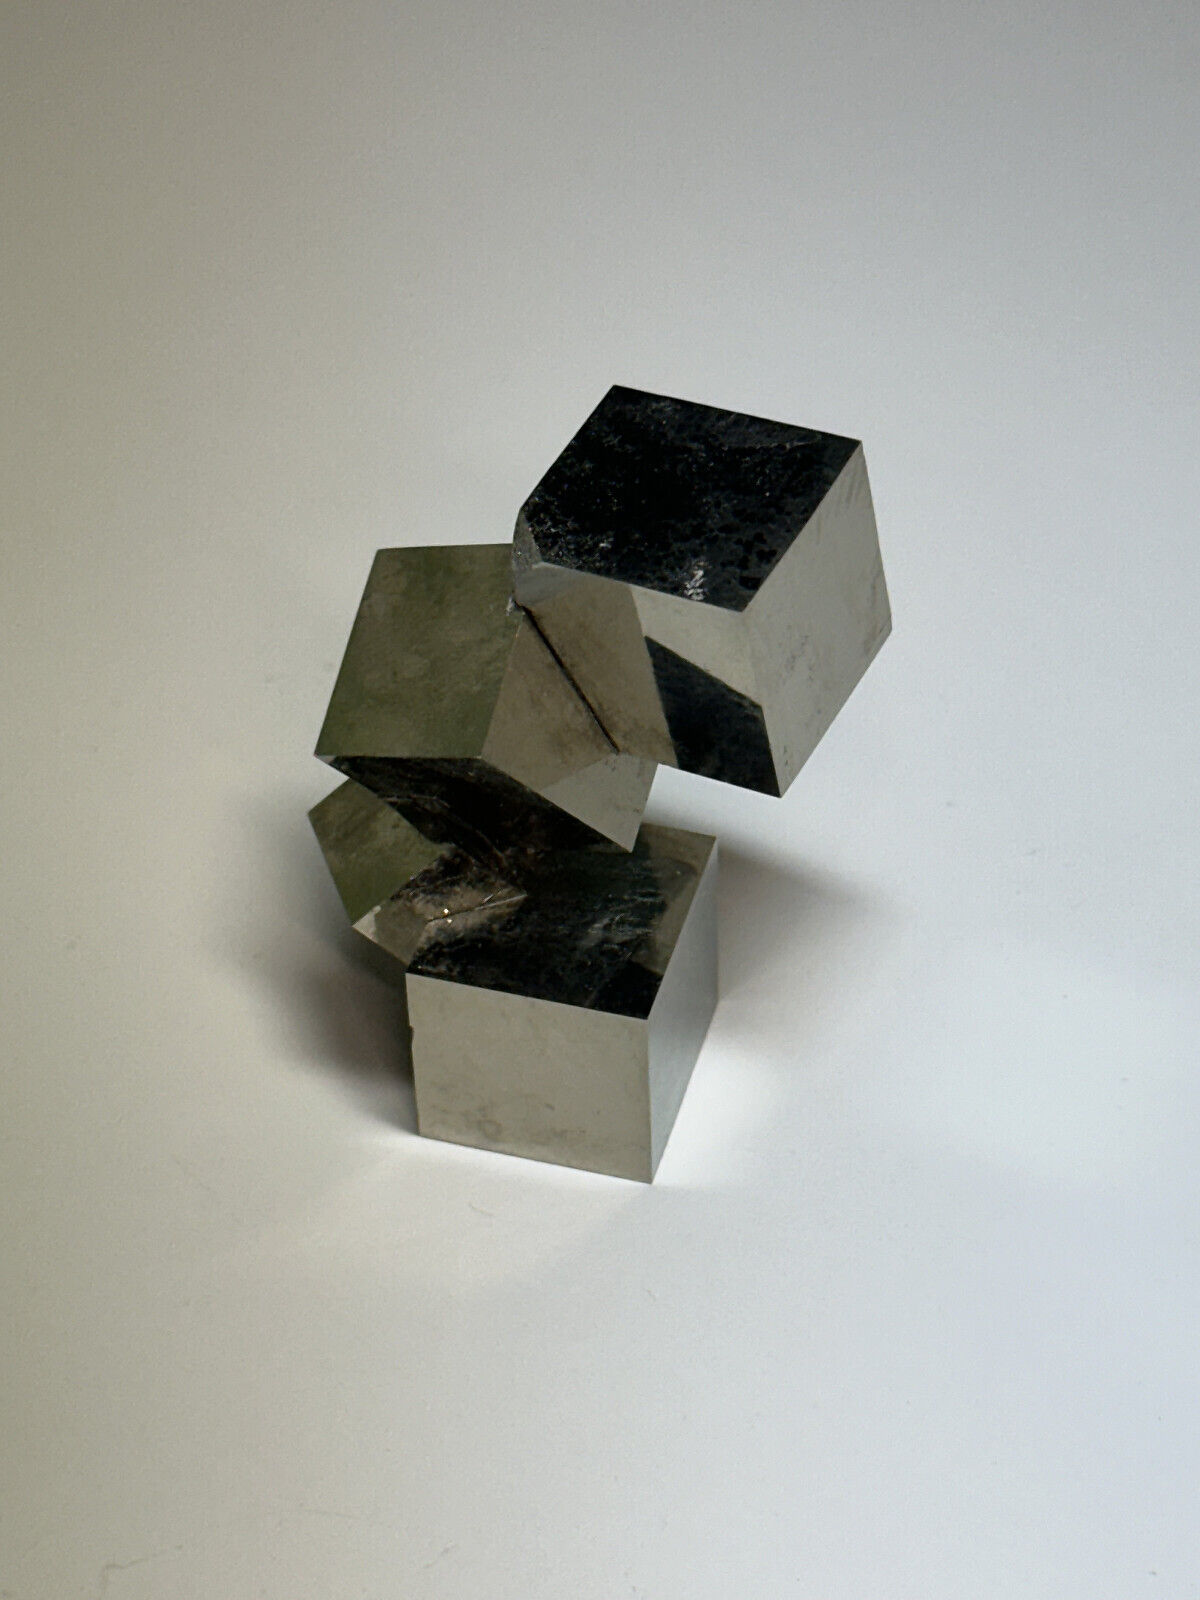 4 cubes__LARGE Lusterous Entwined Interlocking Pyrite Cube Cluster_Spain